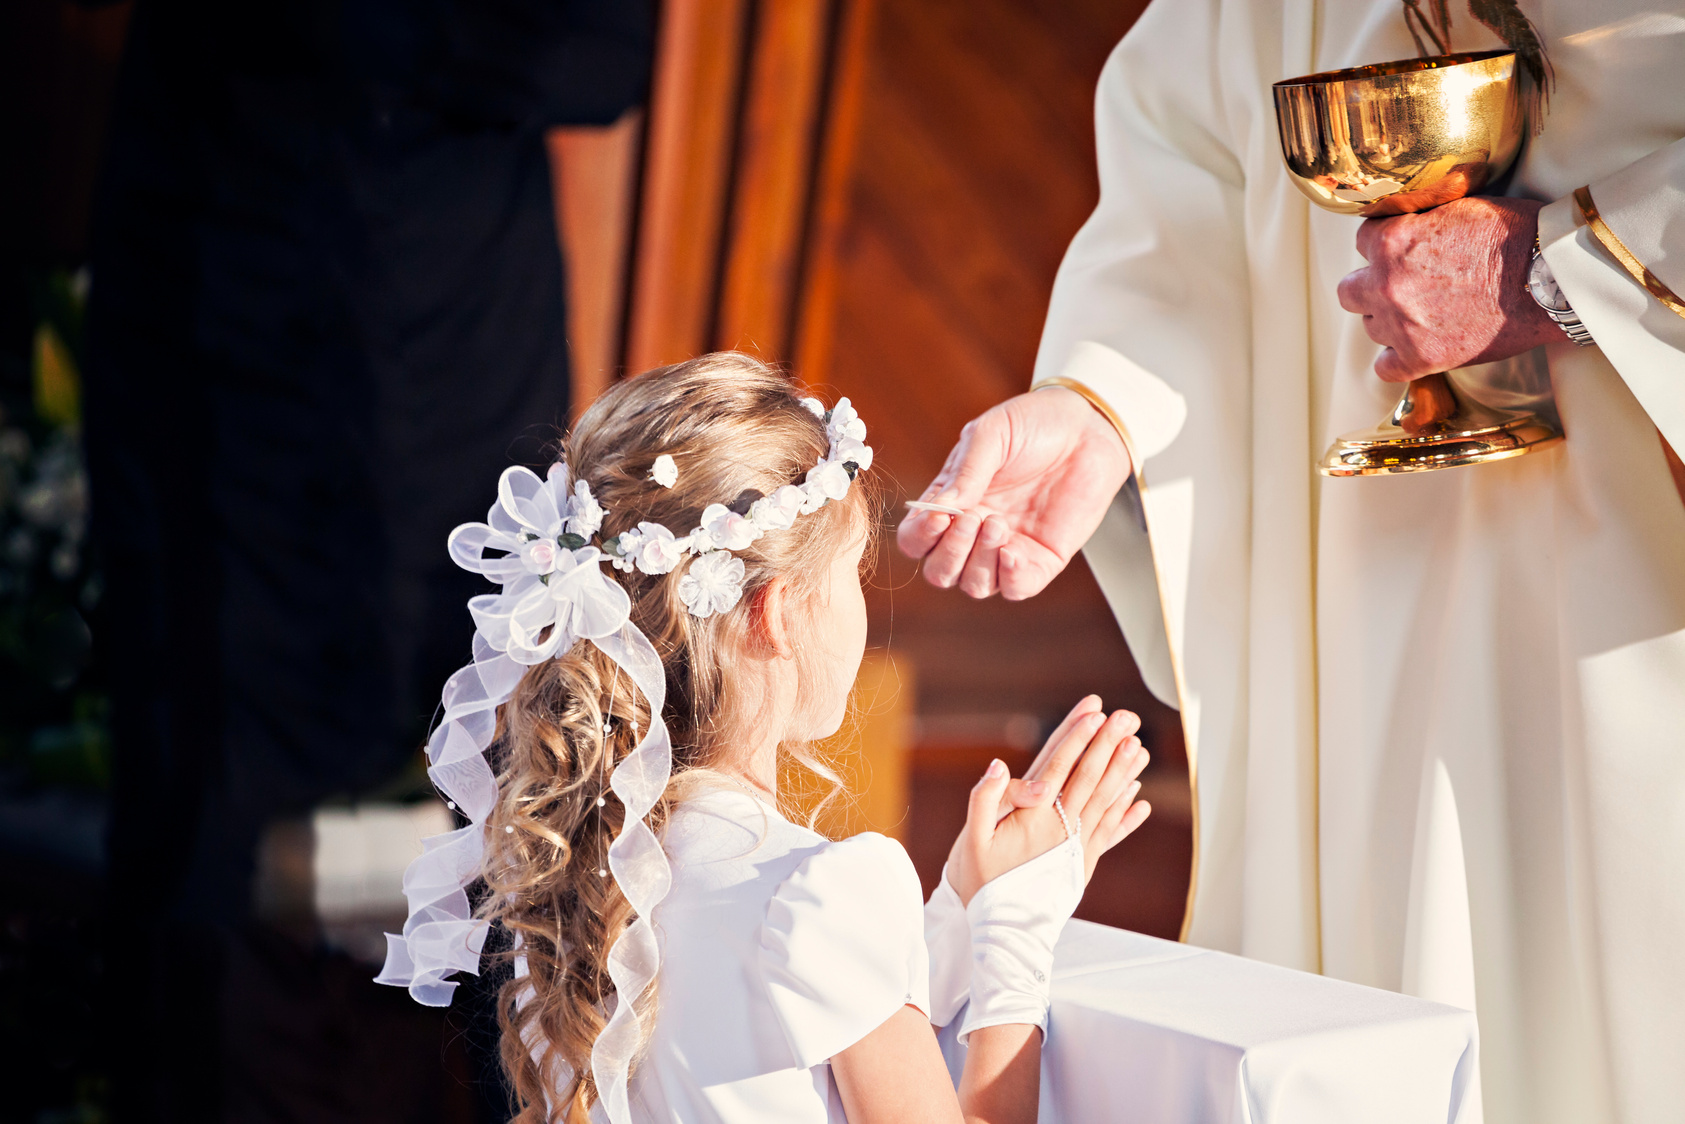 Communion and clergyman. First Holy Communion